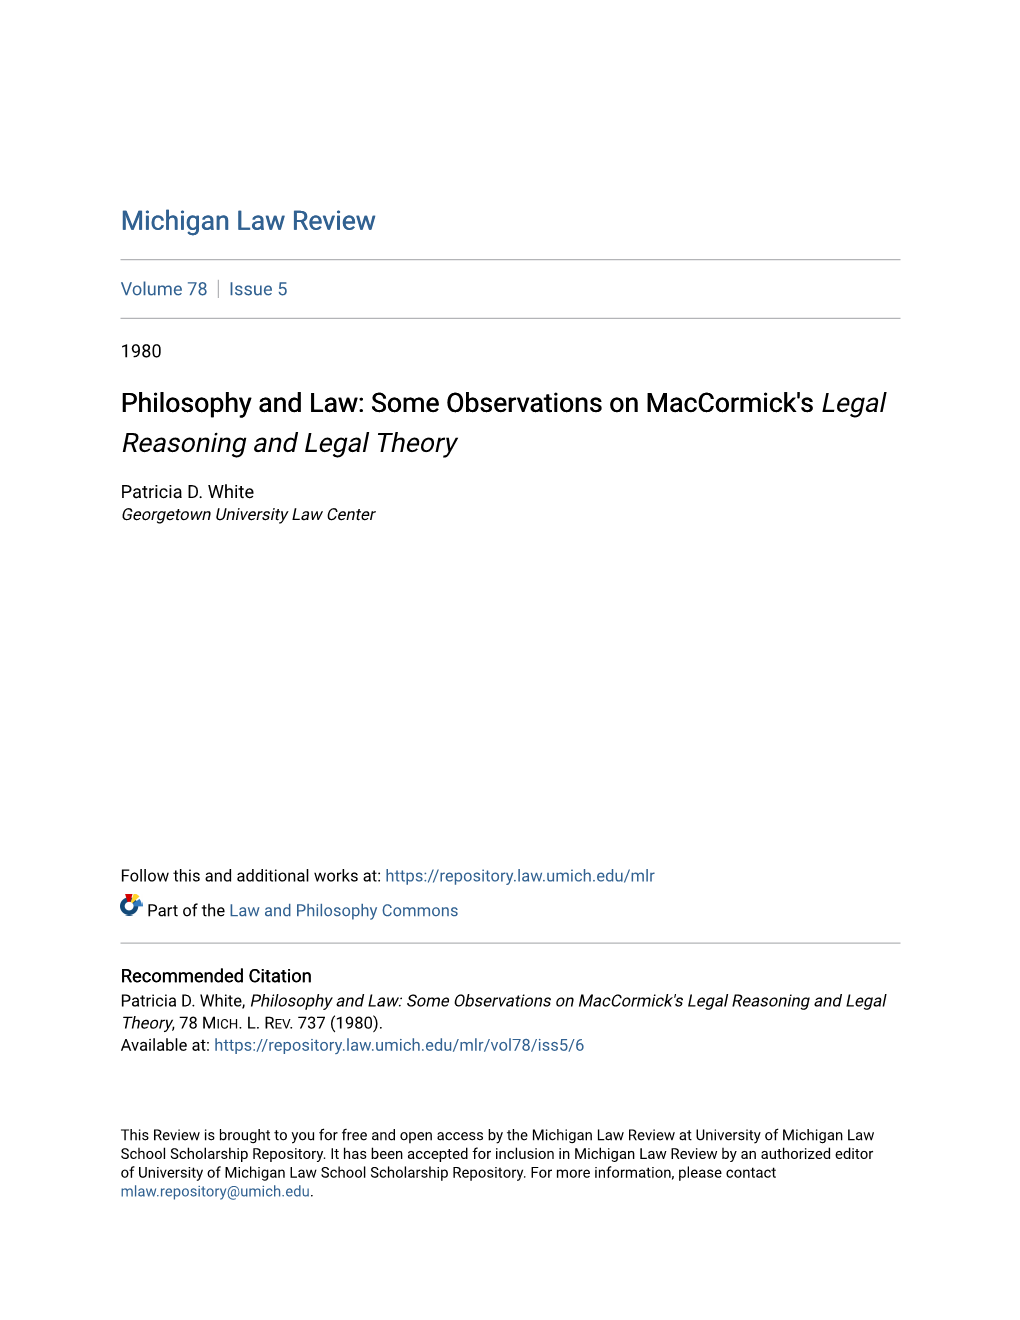 Some Observations on Maccormick's Legal Reasoning and Legal Theory